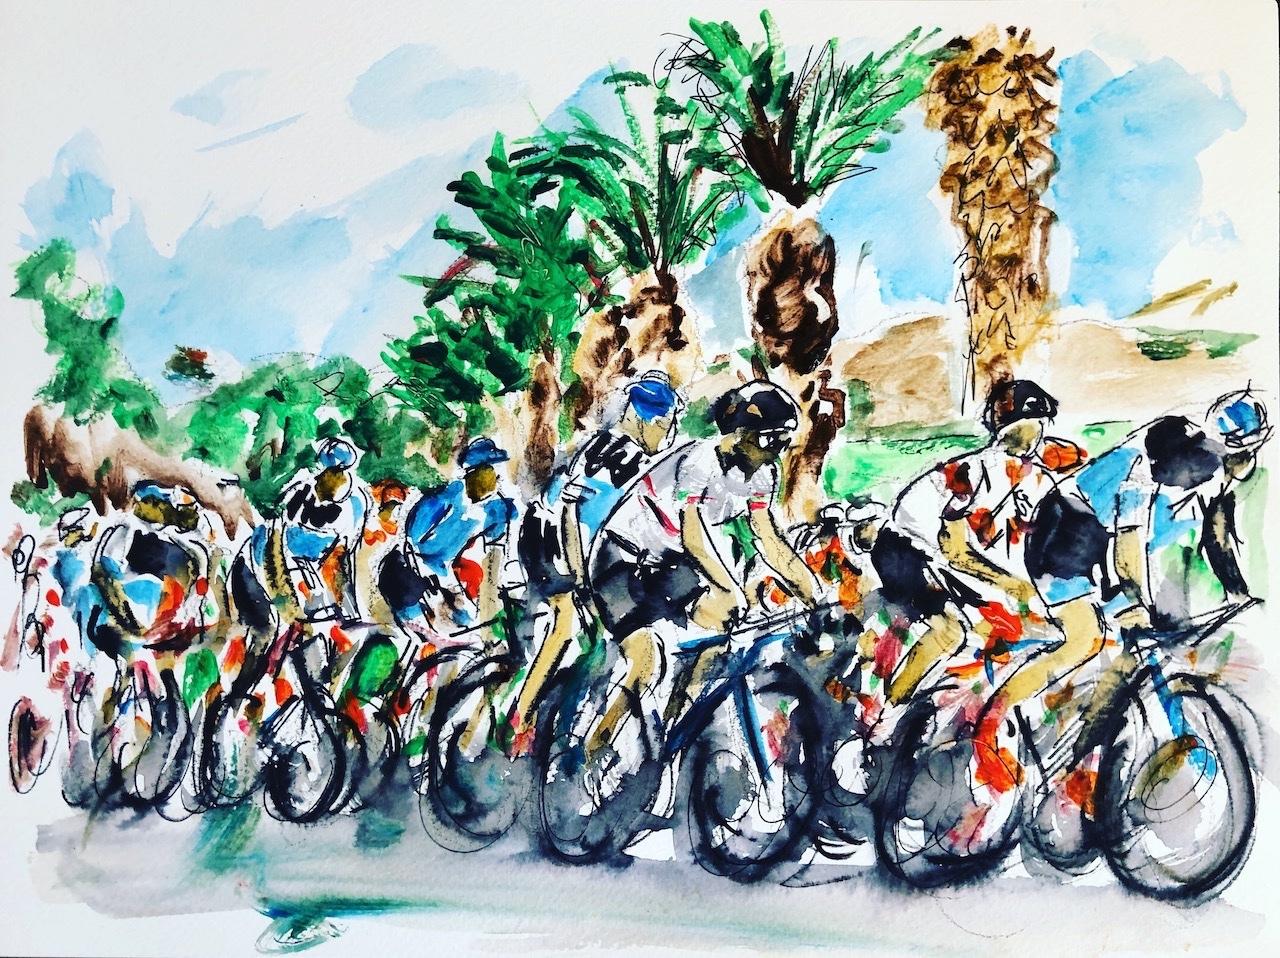 Stage 5 Tour Down Under and Day two of the Tour Down Under 19 diptych

Overall size cm : H48 x W64

Garth Bayley
Stage 5 Tour Down Under
Original Cycling Painting
Watercolour Paint on Paper
Sheet Size: H 24cm x W 32cm x D 0.1cm
Sold Unframed

Garth